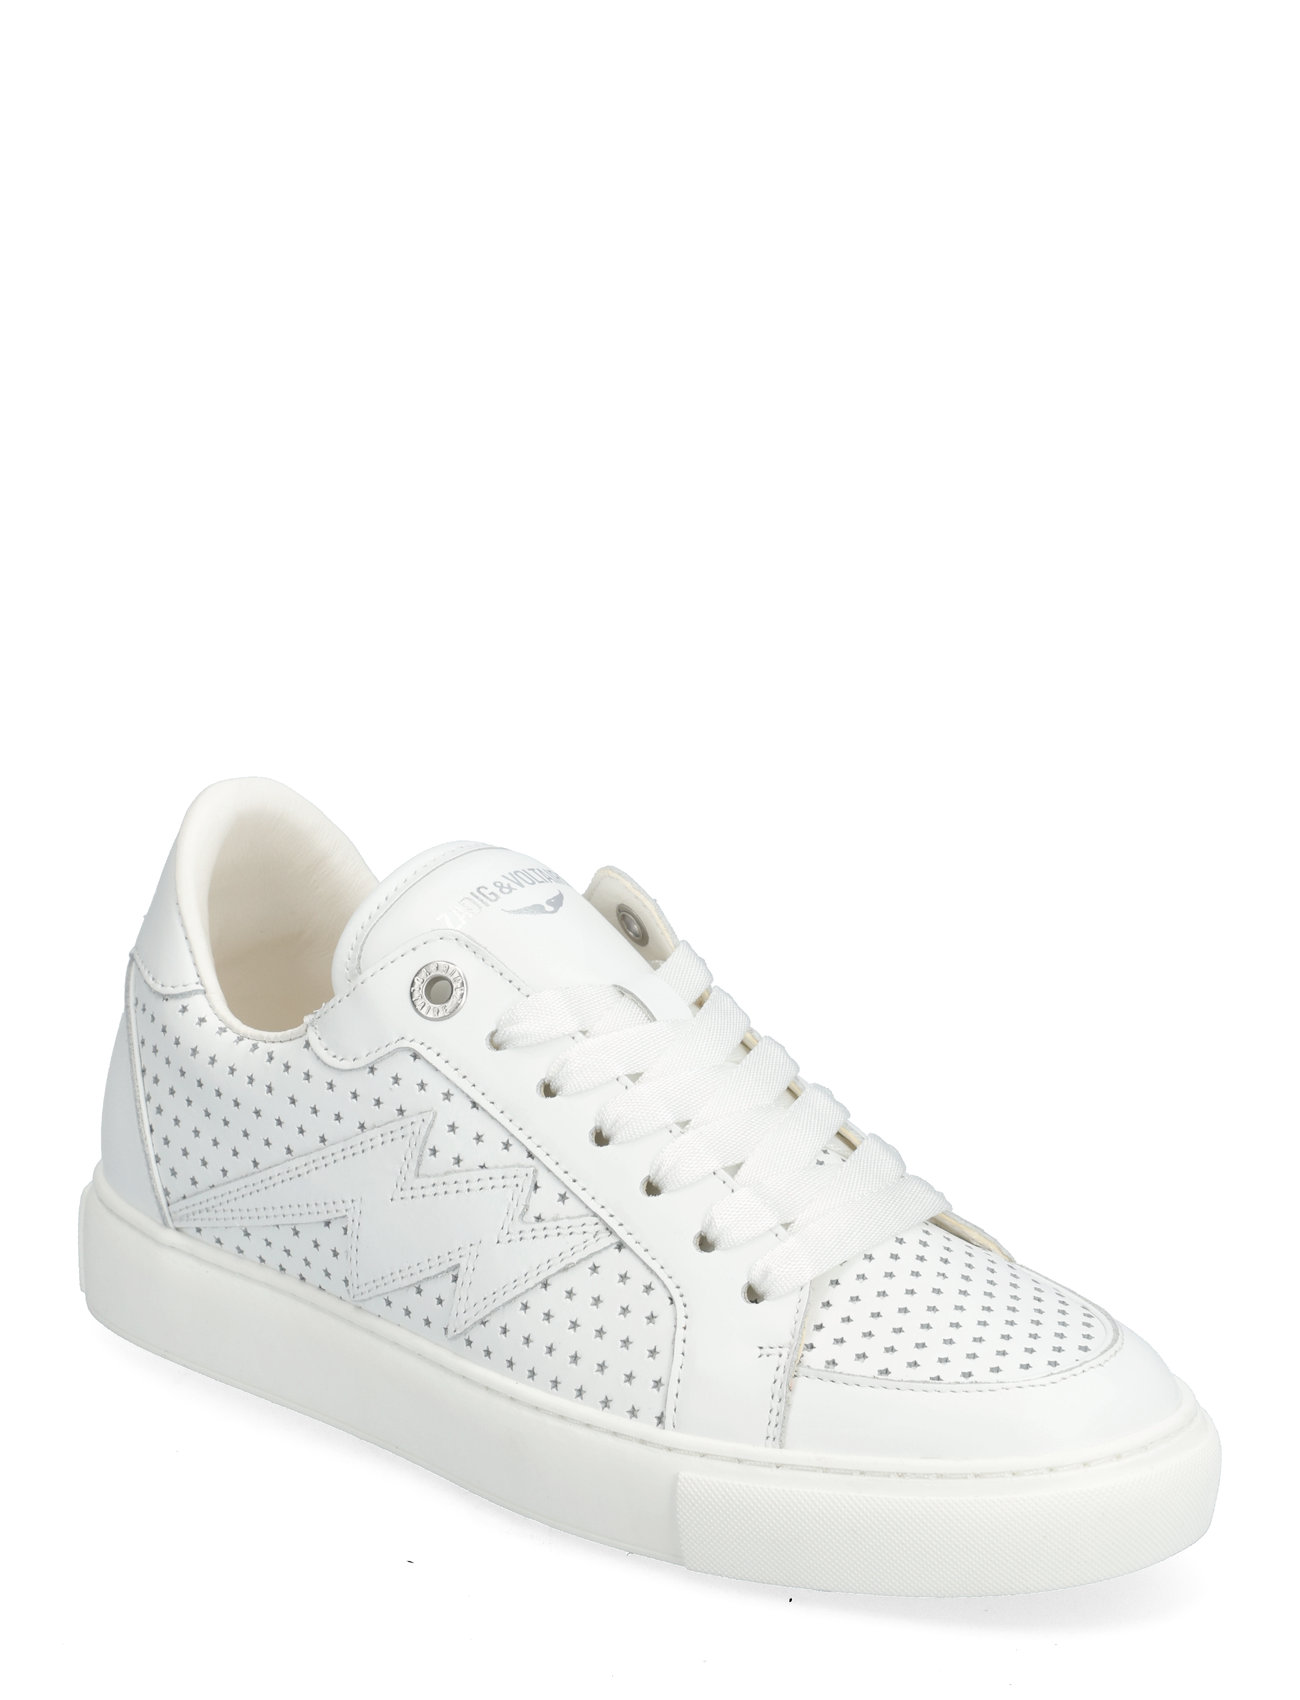 La Flash Smooth Calfskin Perfo Designers Sneakers Low-top Sneakers White Zadig & Voltaire